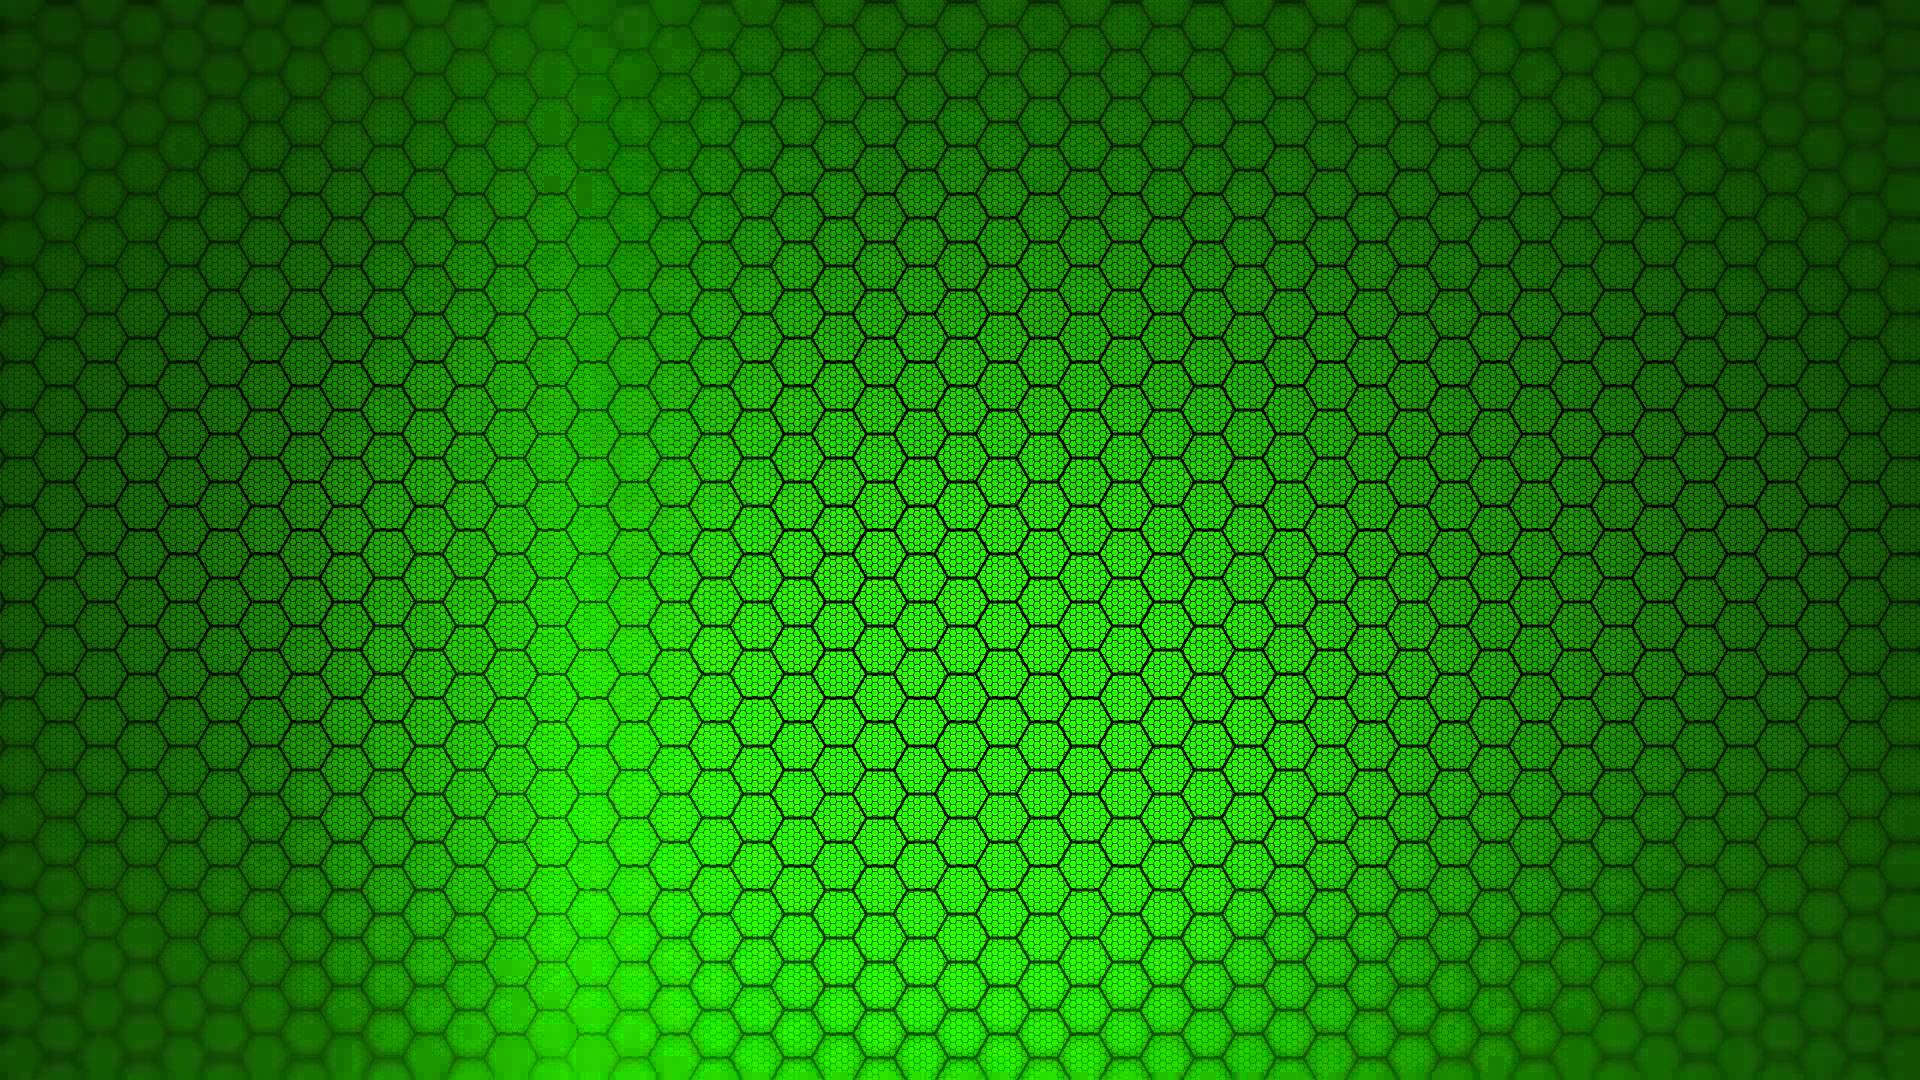 Green Background Images - Wallpaper Cave